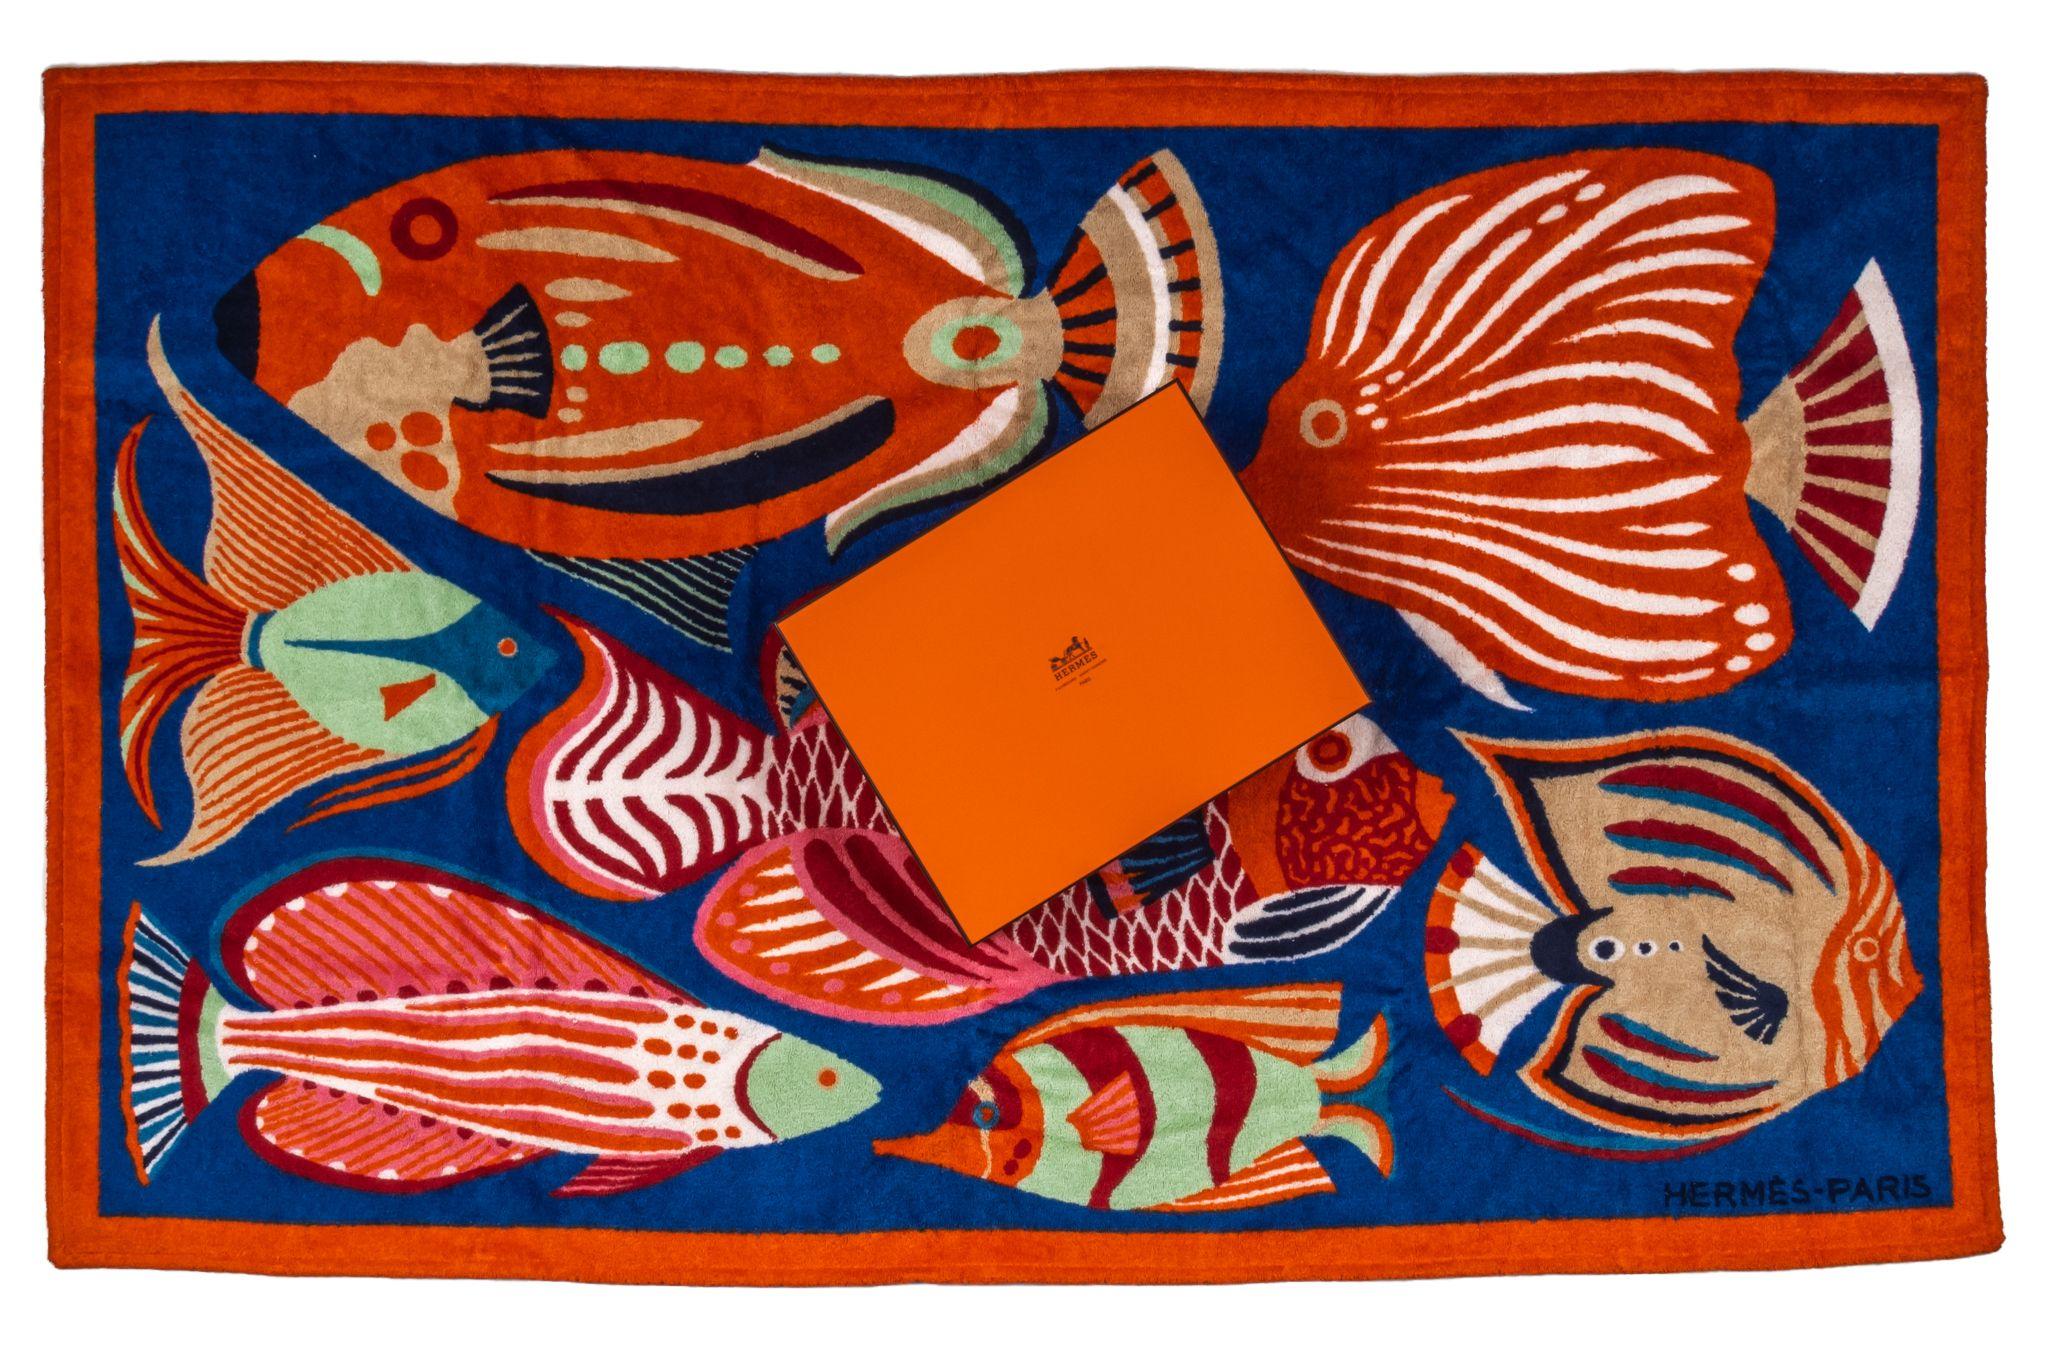 Hermès Fish Beach Towel. The pattern features several fishes in different colors. The piece is new and comes in the original box.